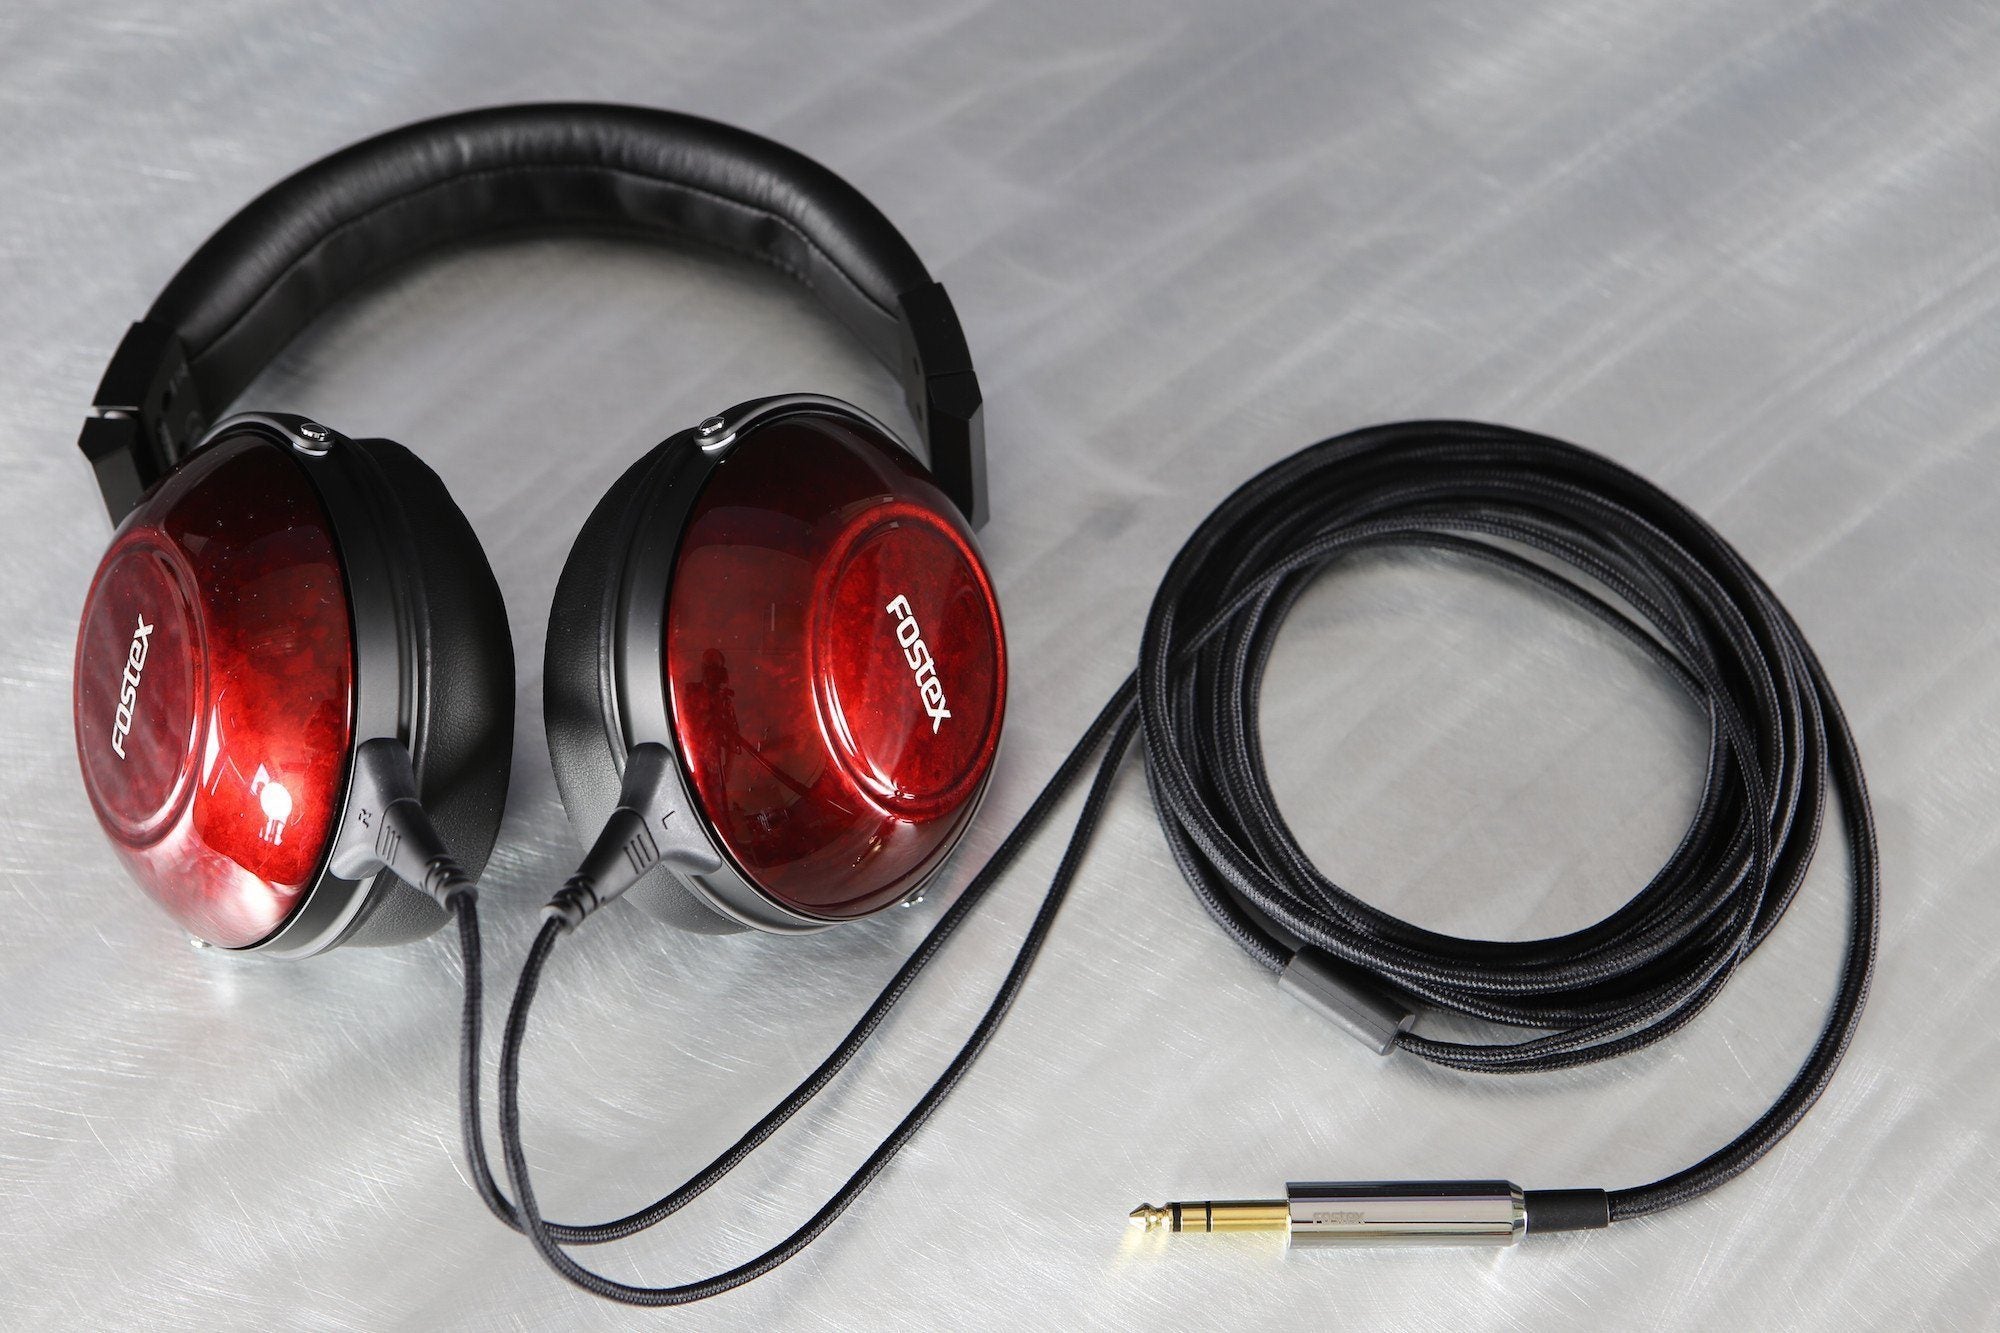 Fostex TH-900 MKII Headphone Review